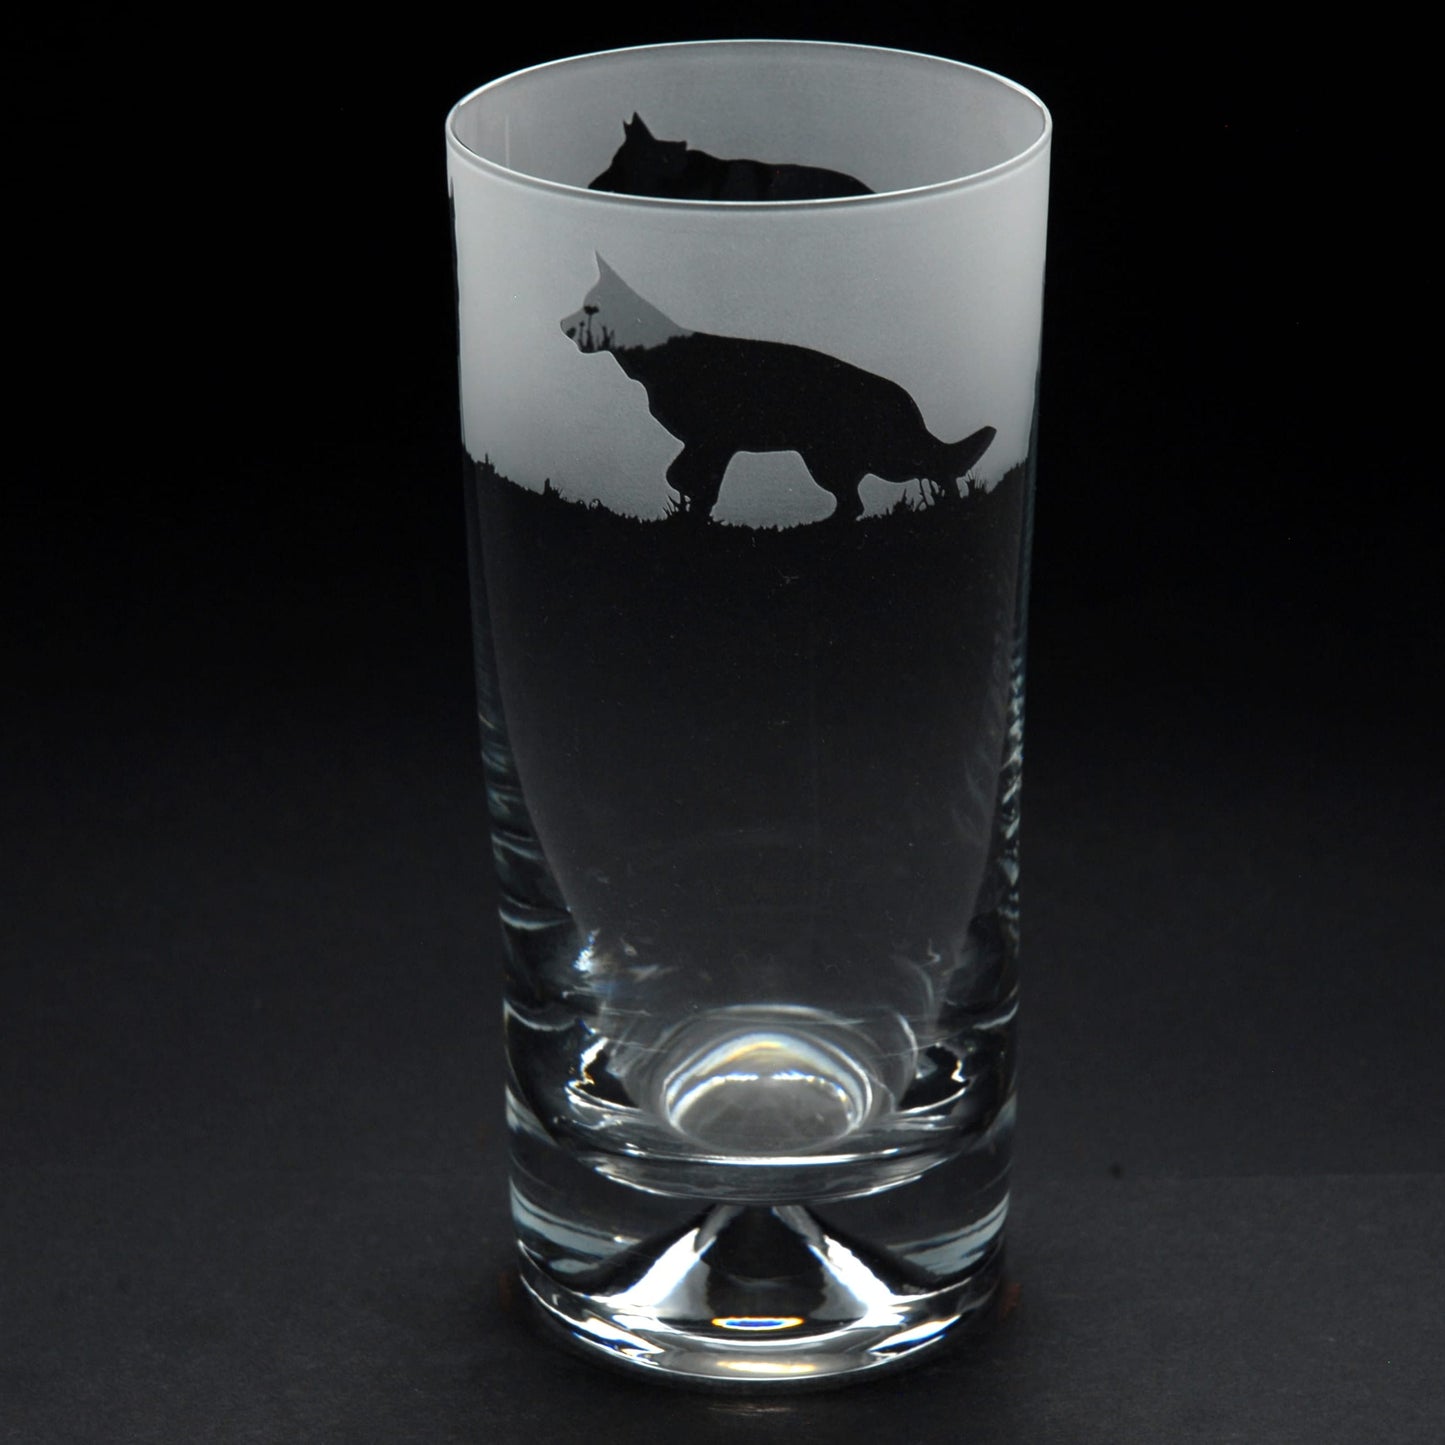 German Shepherd Dog Highball Glass - Hand Etched/Engraved Gift